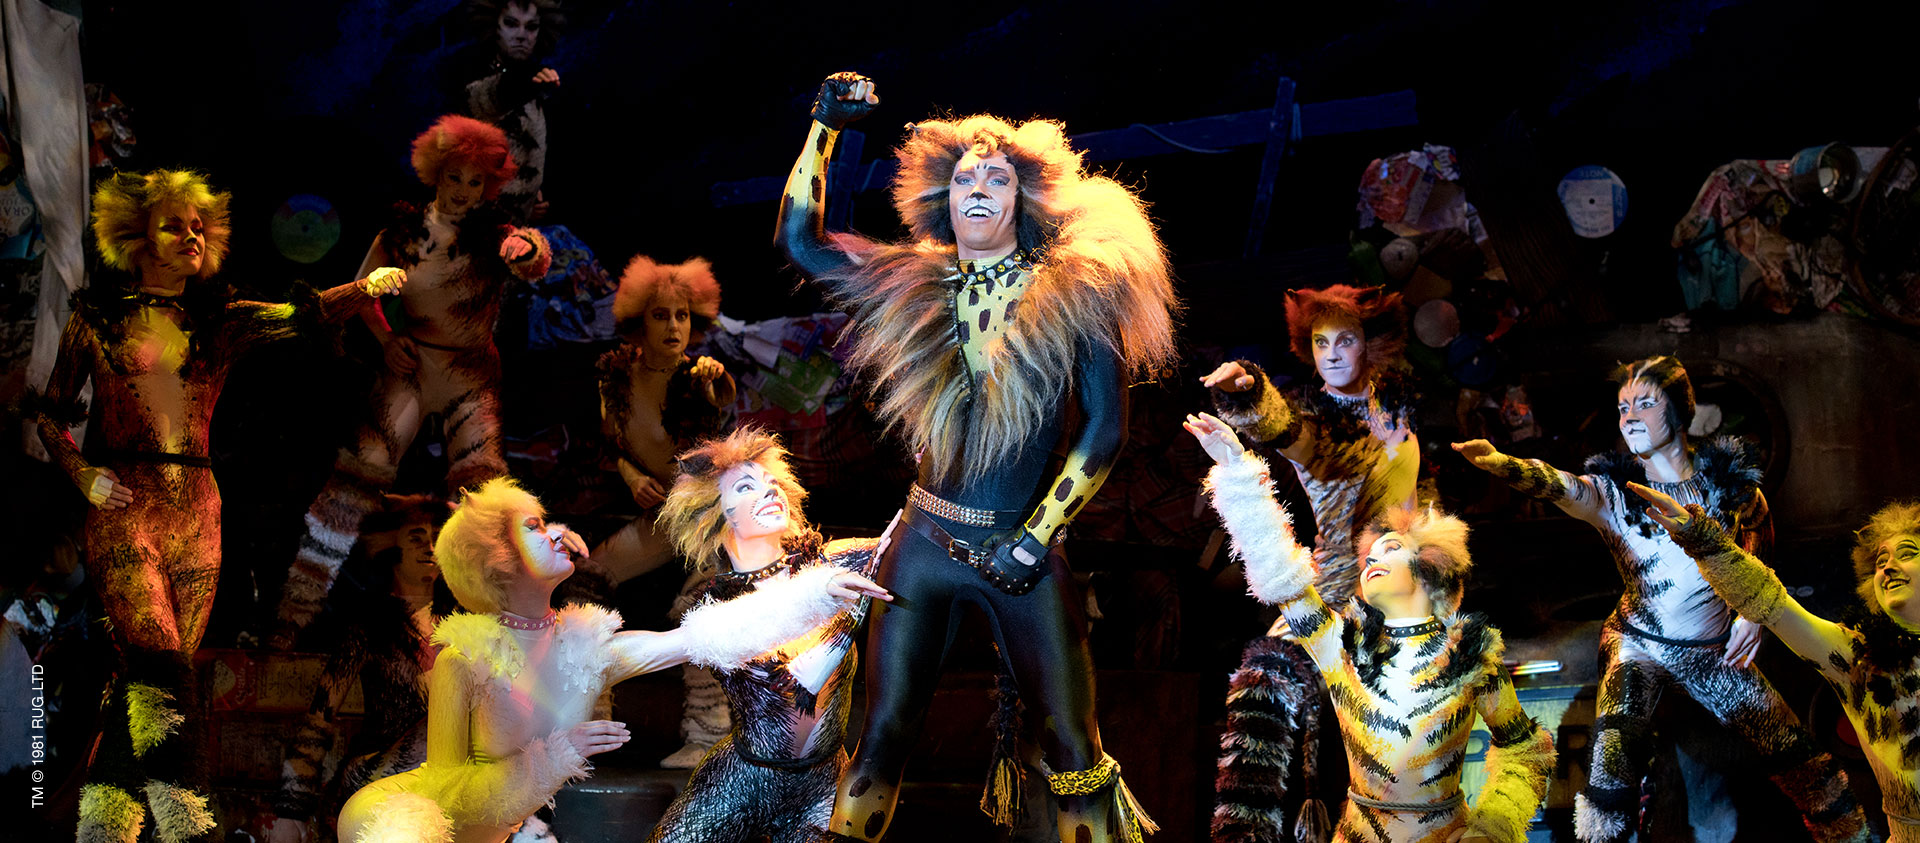 Self Drafted I Made A Rum Tum Tugger Costume For A Client Sewing Crafts Handmade Quilting Fabric V Cats The Musical Costume Cats Musical Jellicle Cats